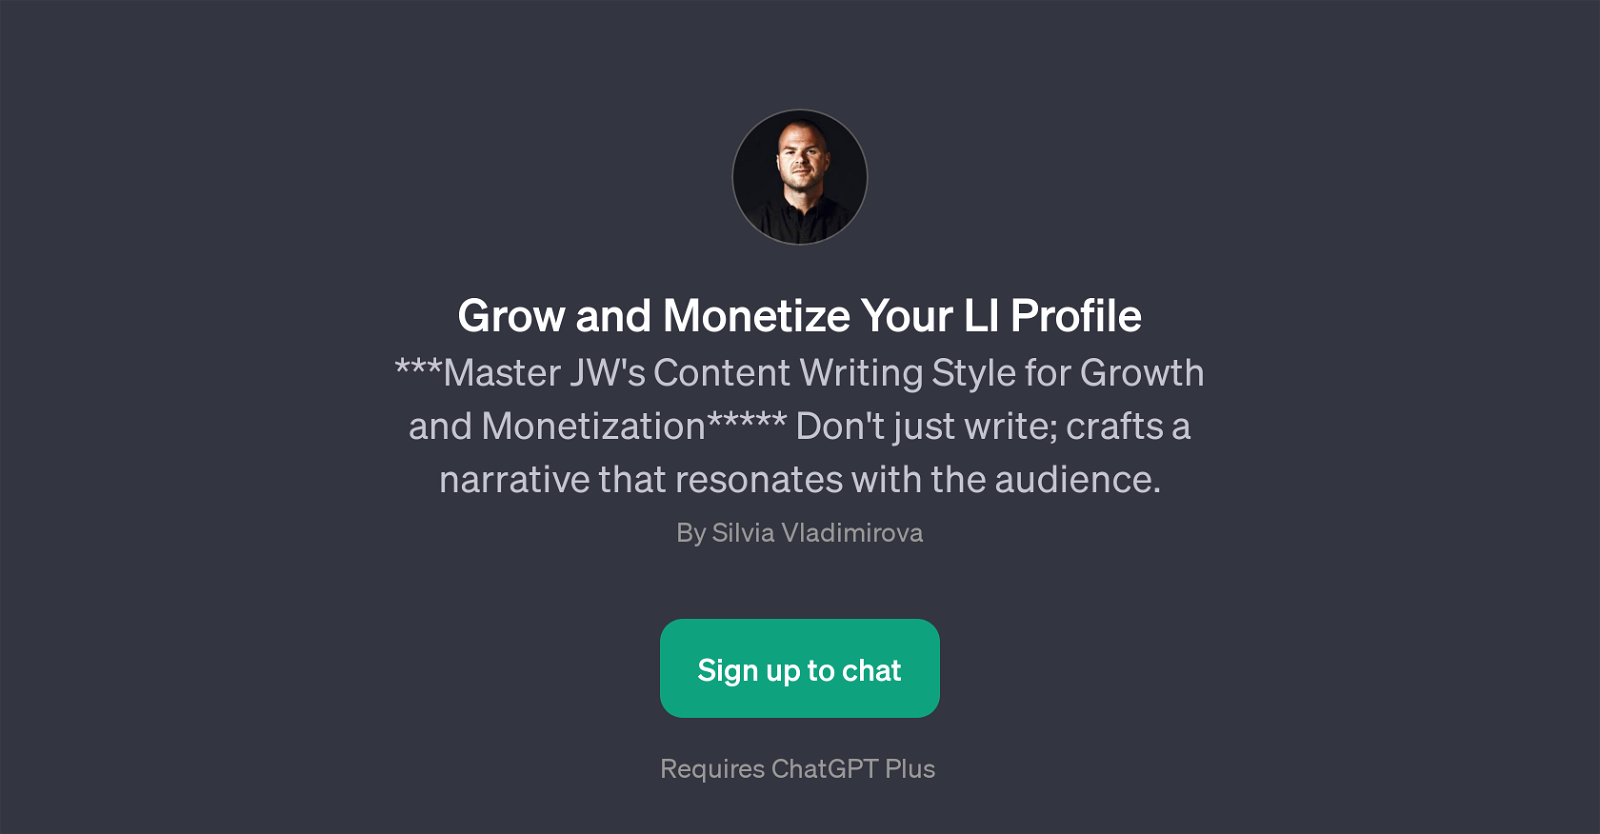 Grow and Monetize Your LI Profile website